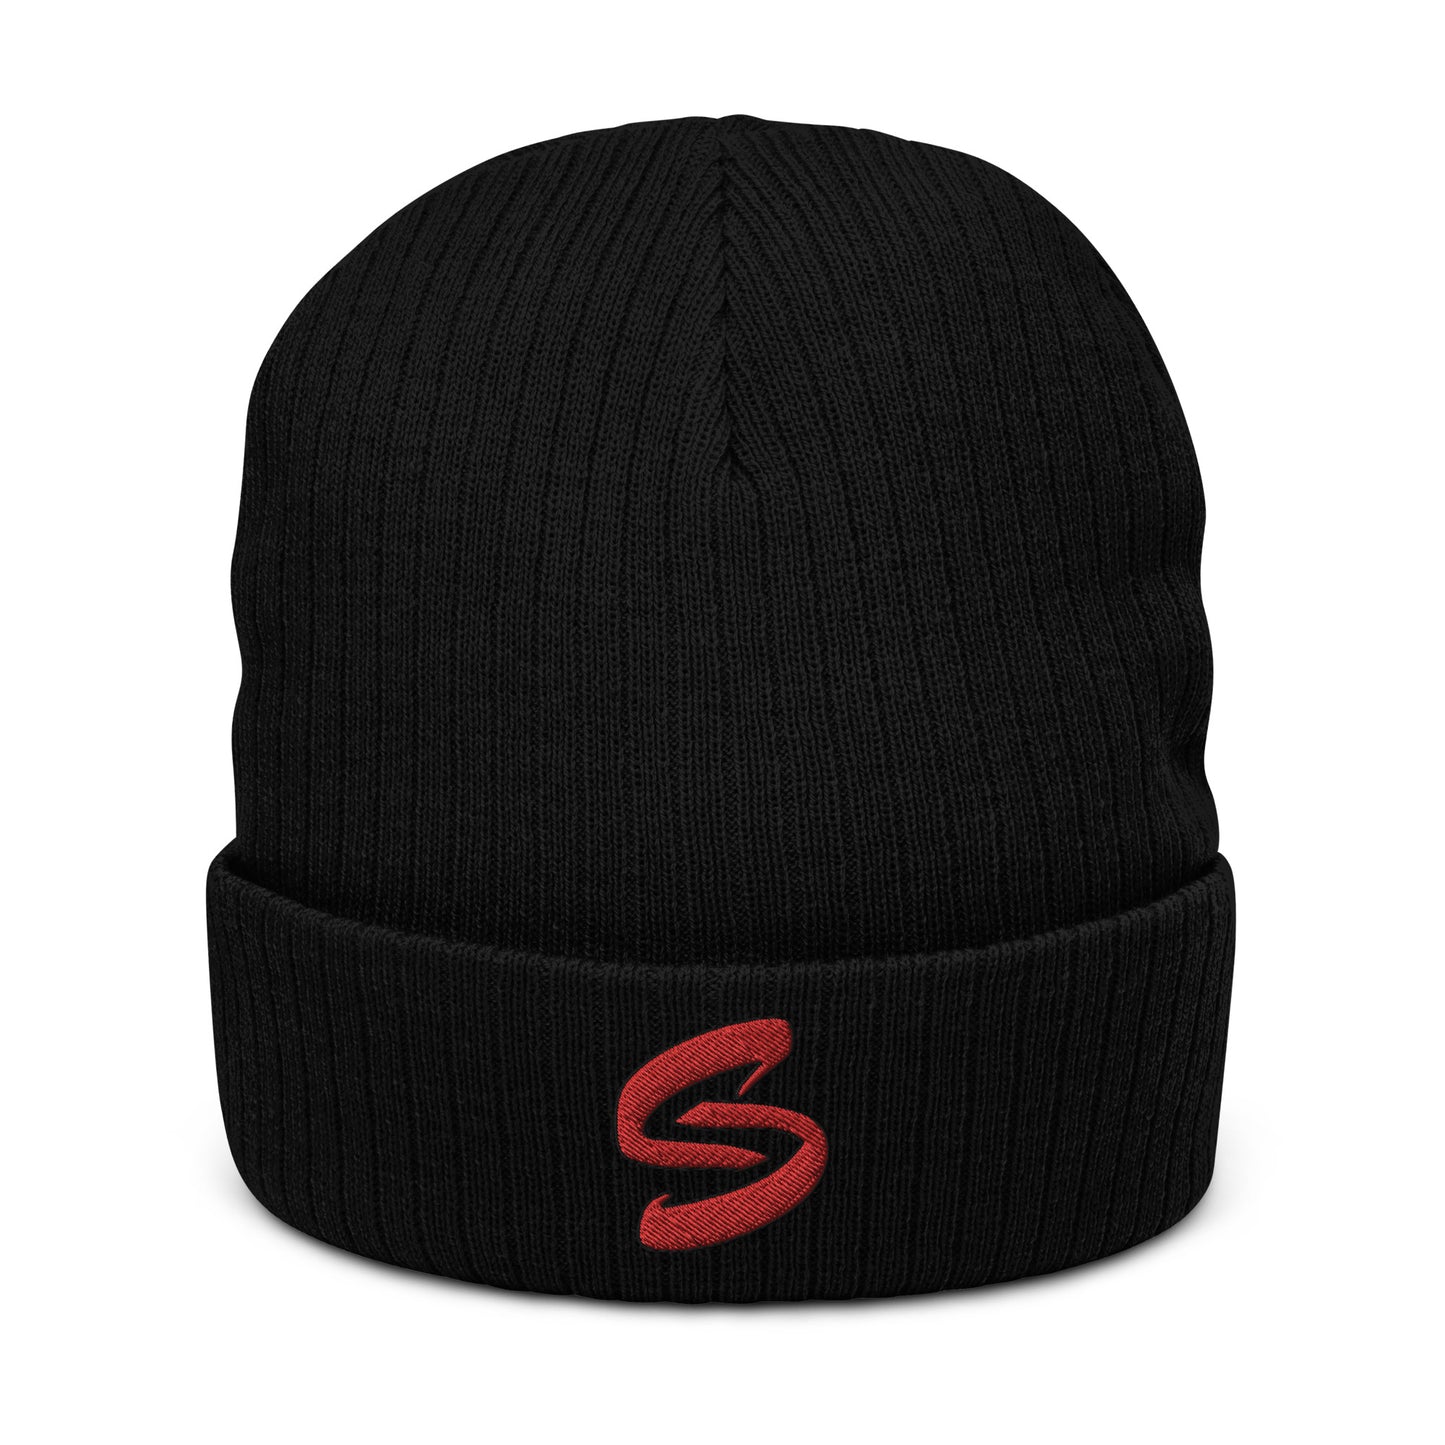 Ribbed knit beanie in recycled polyester and acrylic blend, double-layered with a cuffed design. Stylish, warm, and versatile accessory for all head sizes. Handcrafted on demand to reduce overproduction and promote sustainable choices. 8.27 inches (21 cm) in length. Beanie in Black with embroidered Red Send Coalition S logo